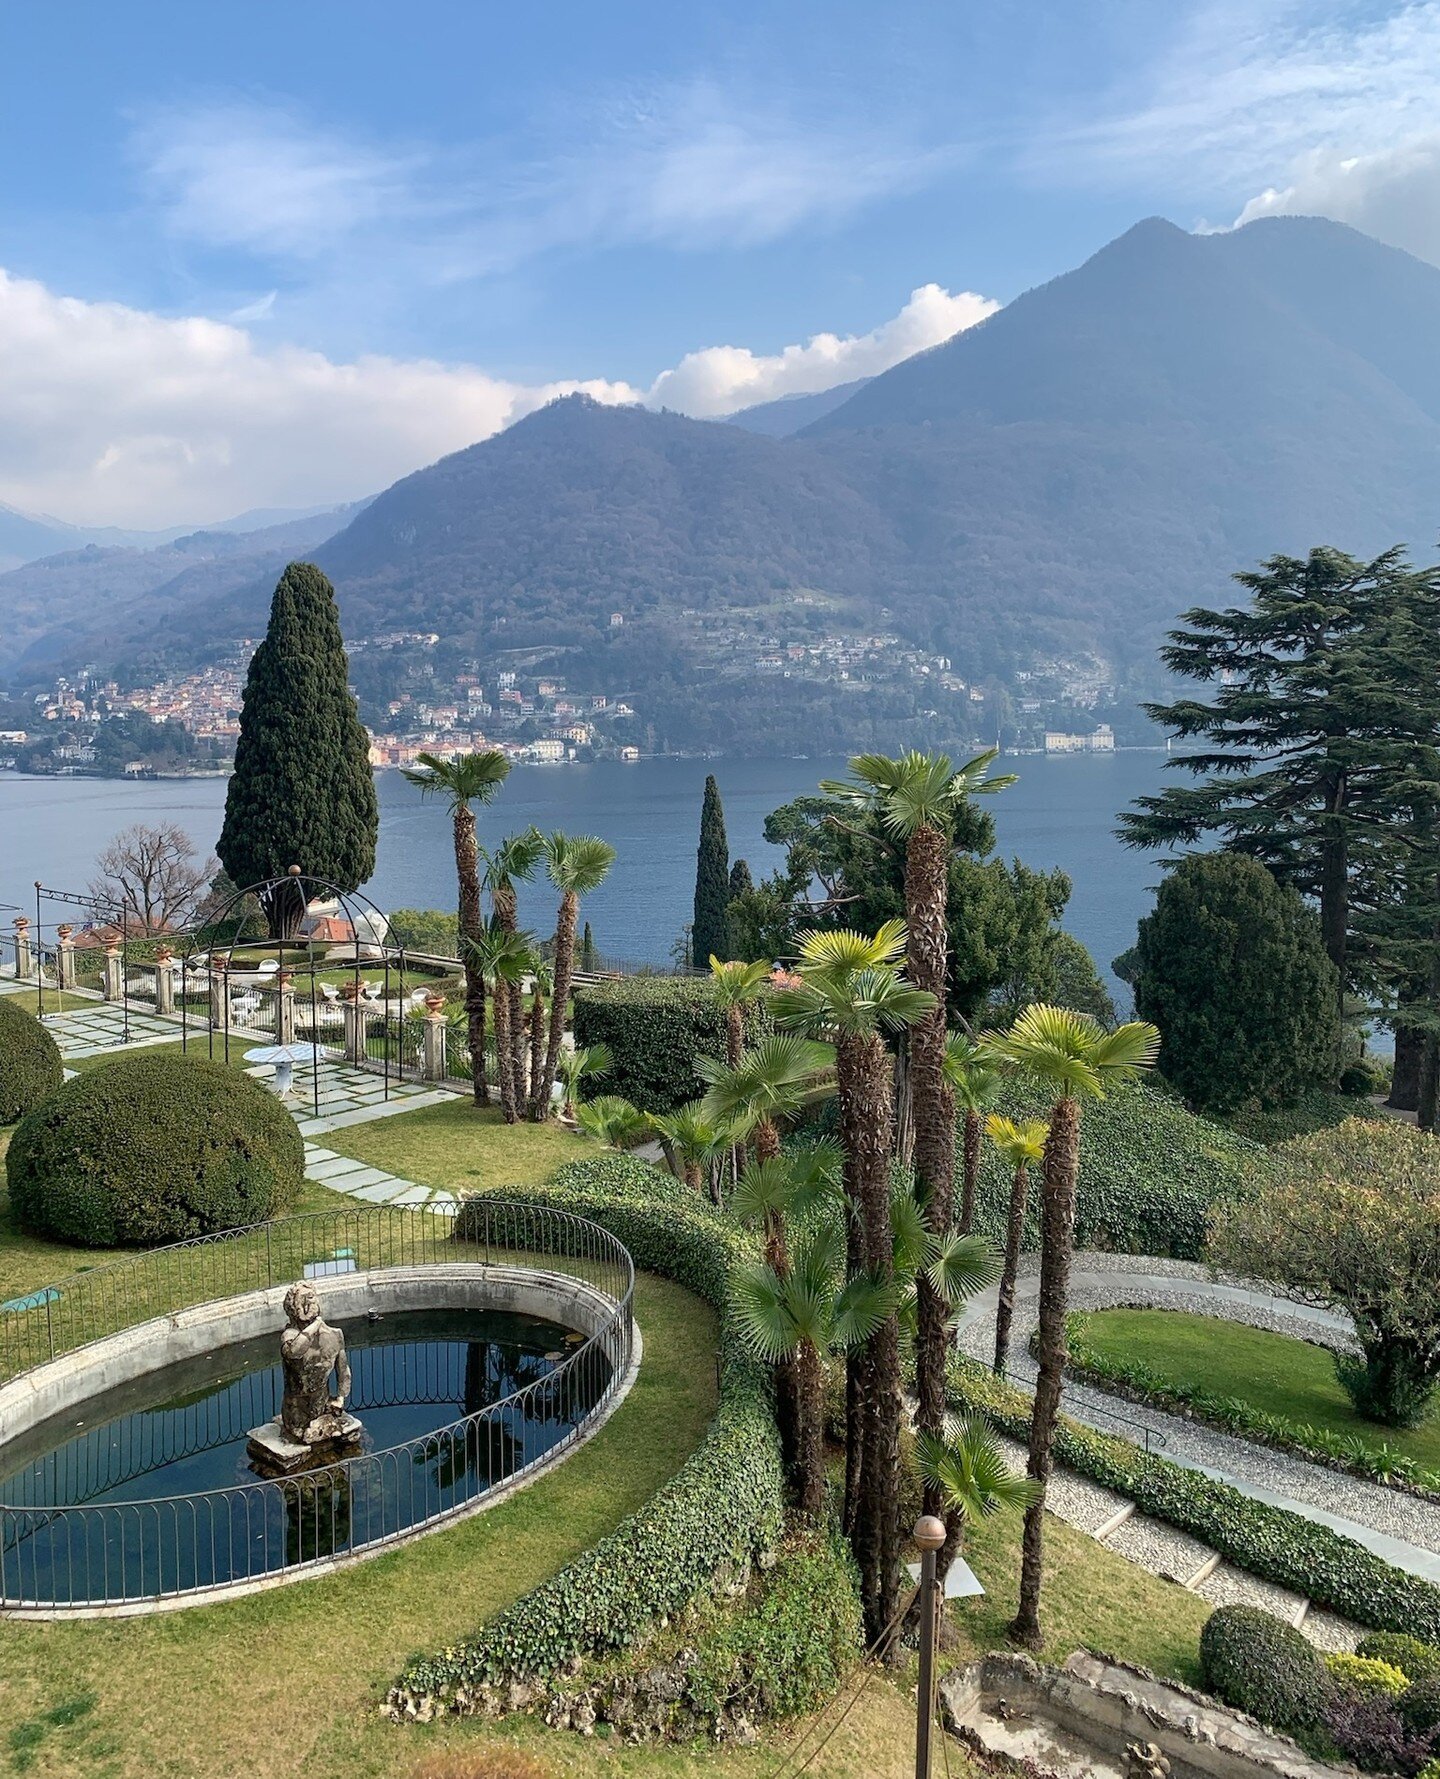 Site visiting the incredibly beautiful @passalacqualakecomo. Although it's still closed for the winter, and didn't have any of it's gorgeous garden furniture and parasols out for me to drool over, it did not disappoint. Cannot wait to return in the s